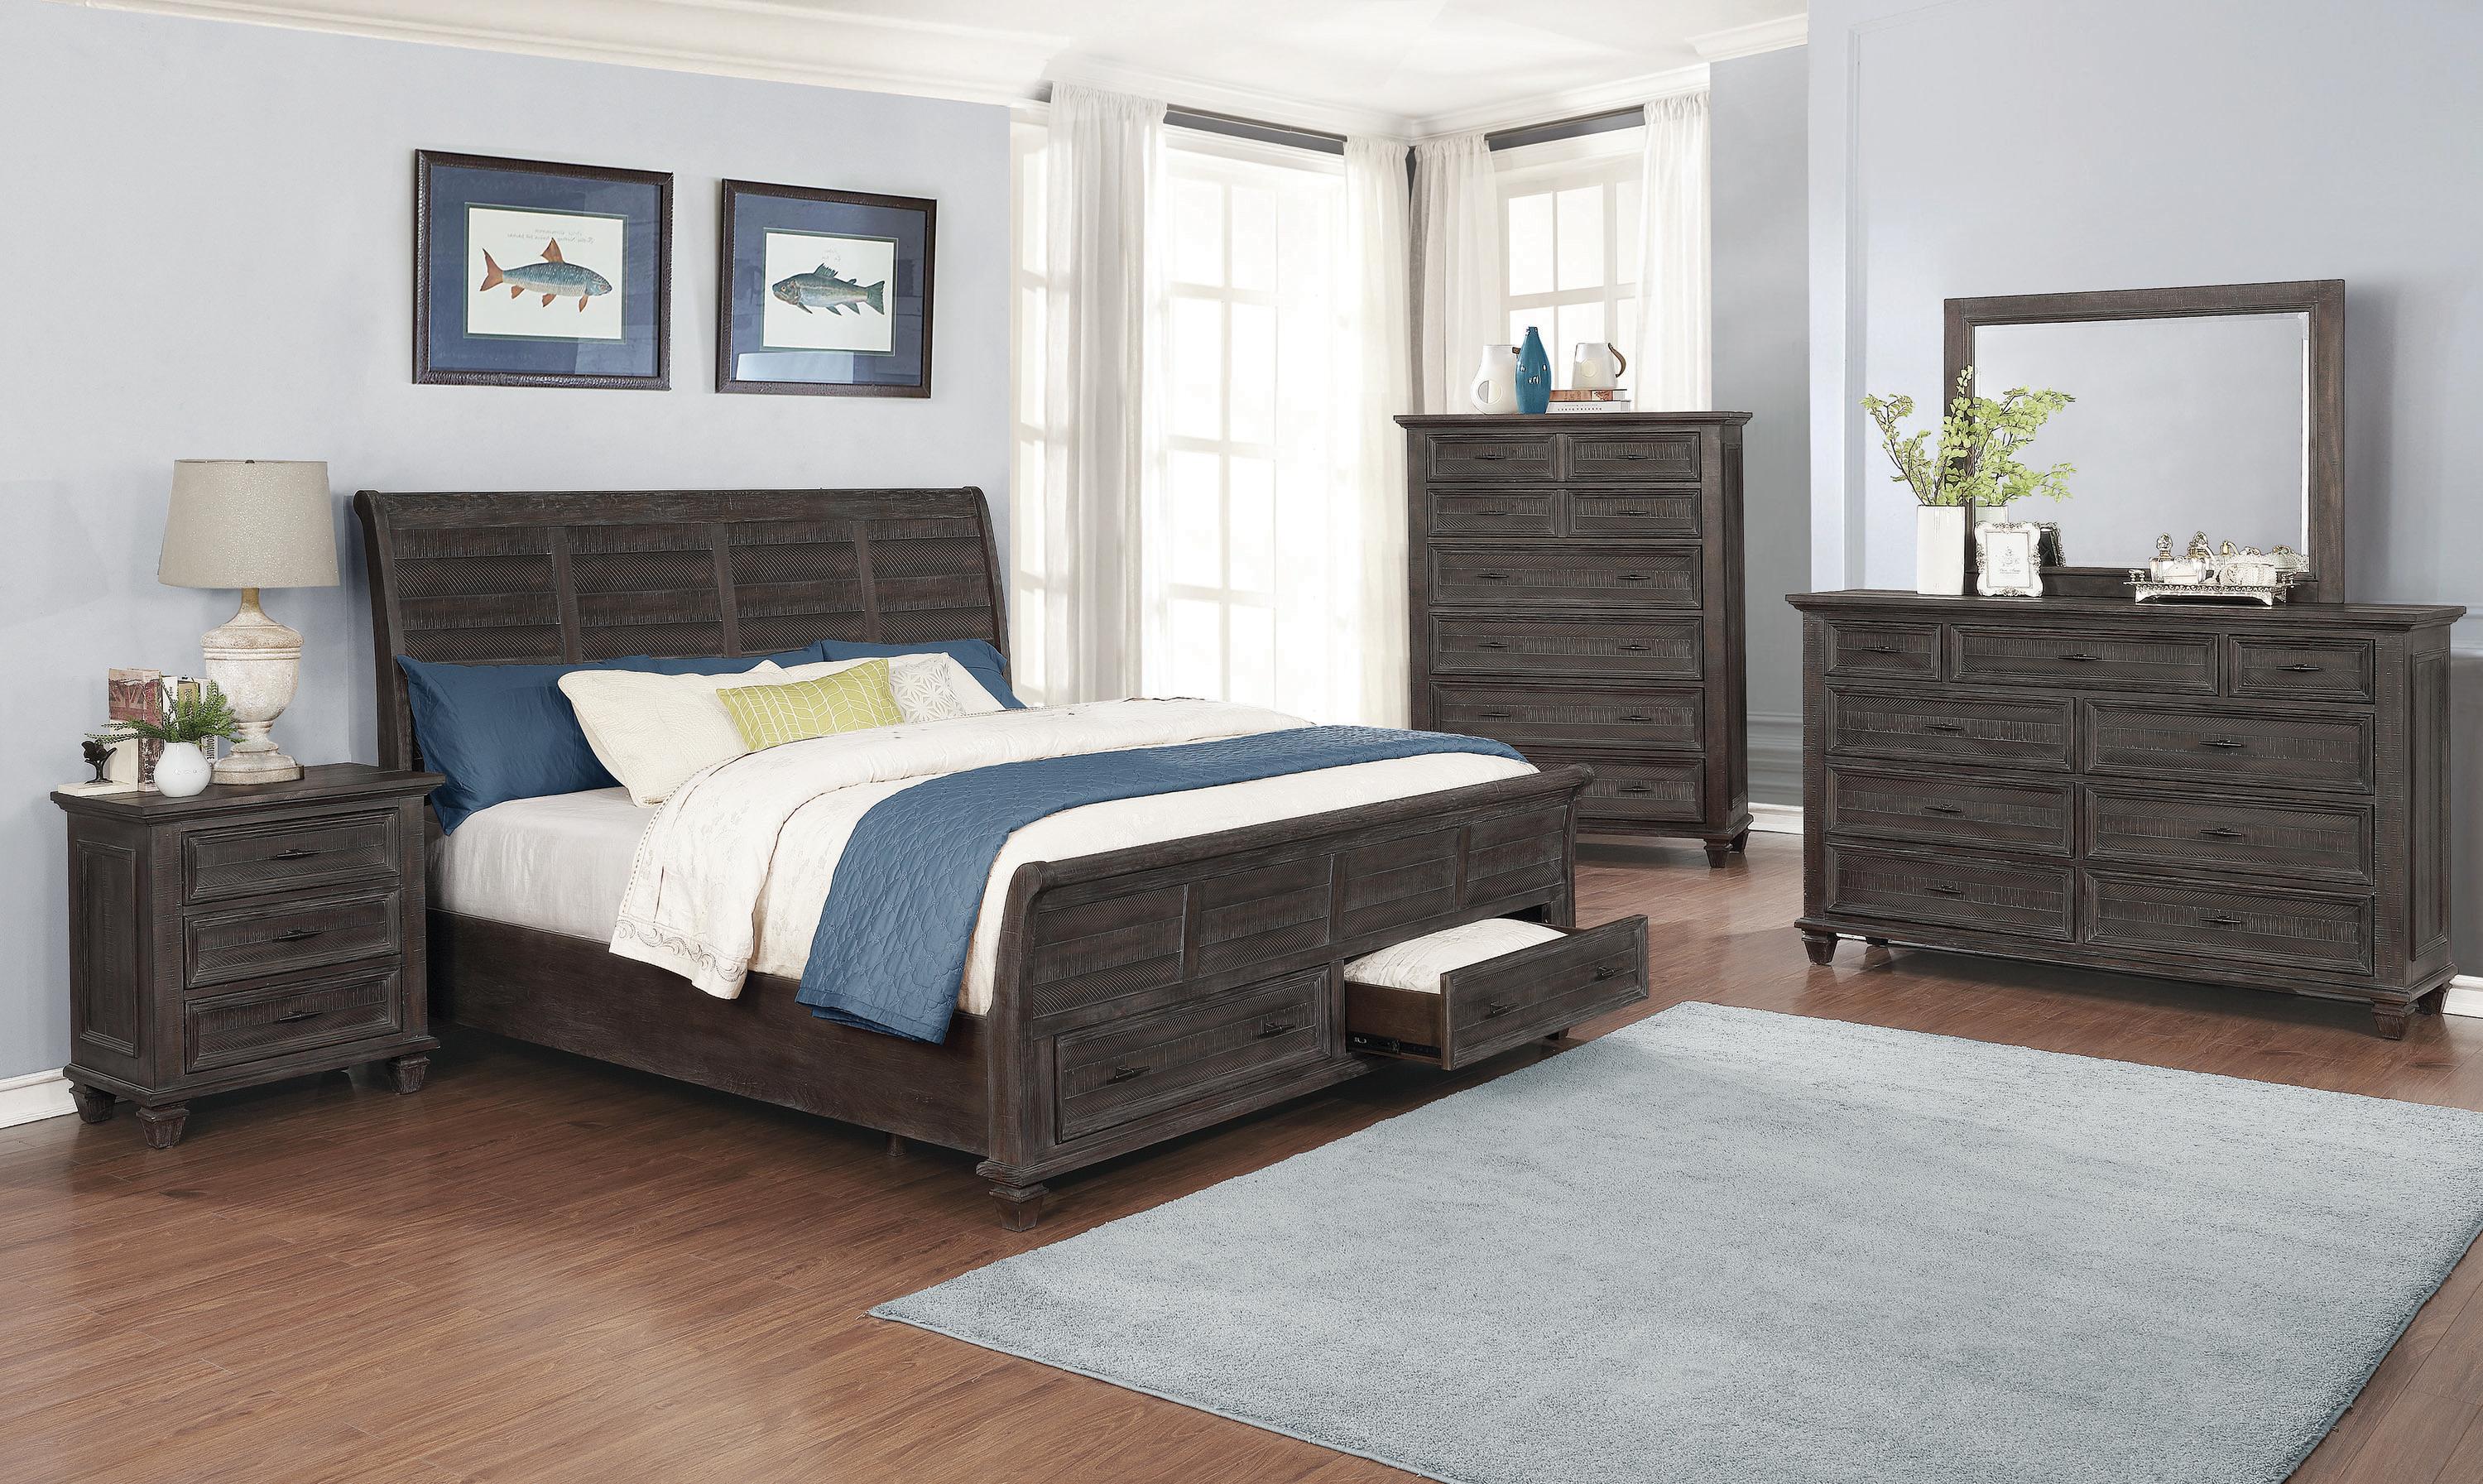 Transitional Bedroom Set 222880Q-5PC Atascadero 222880Q-5PC in Brown 